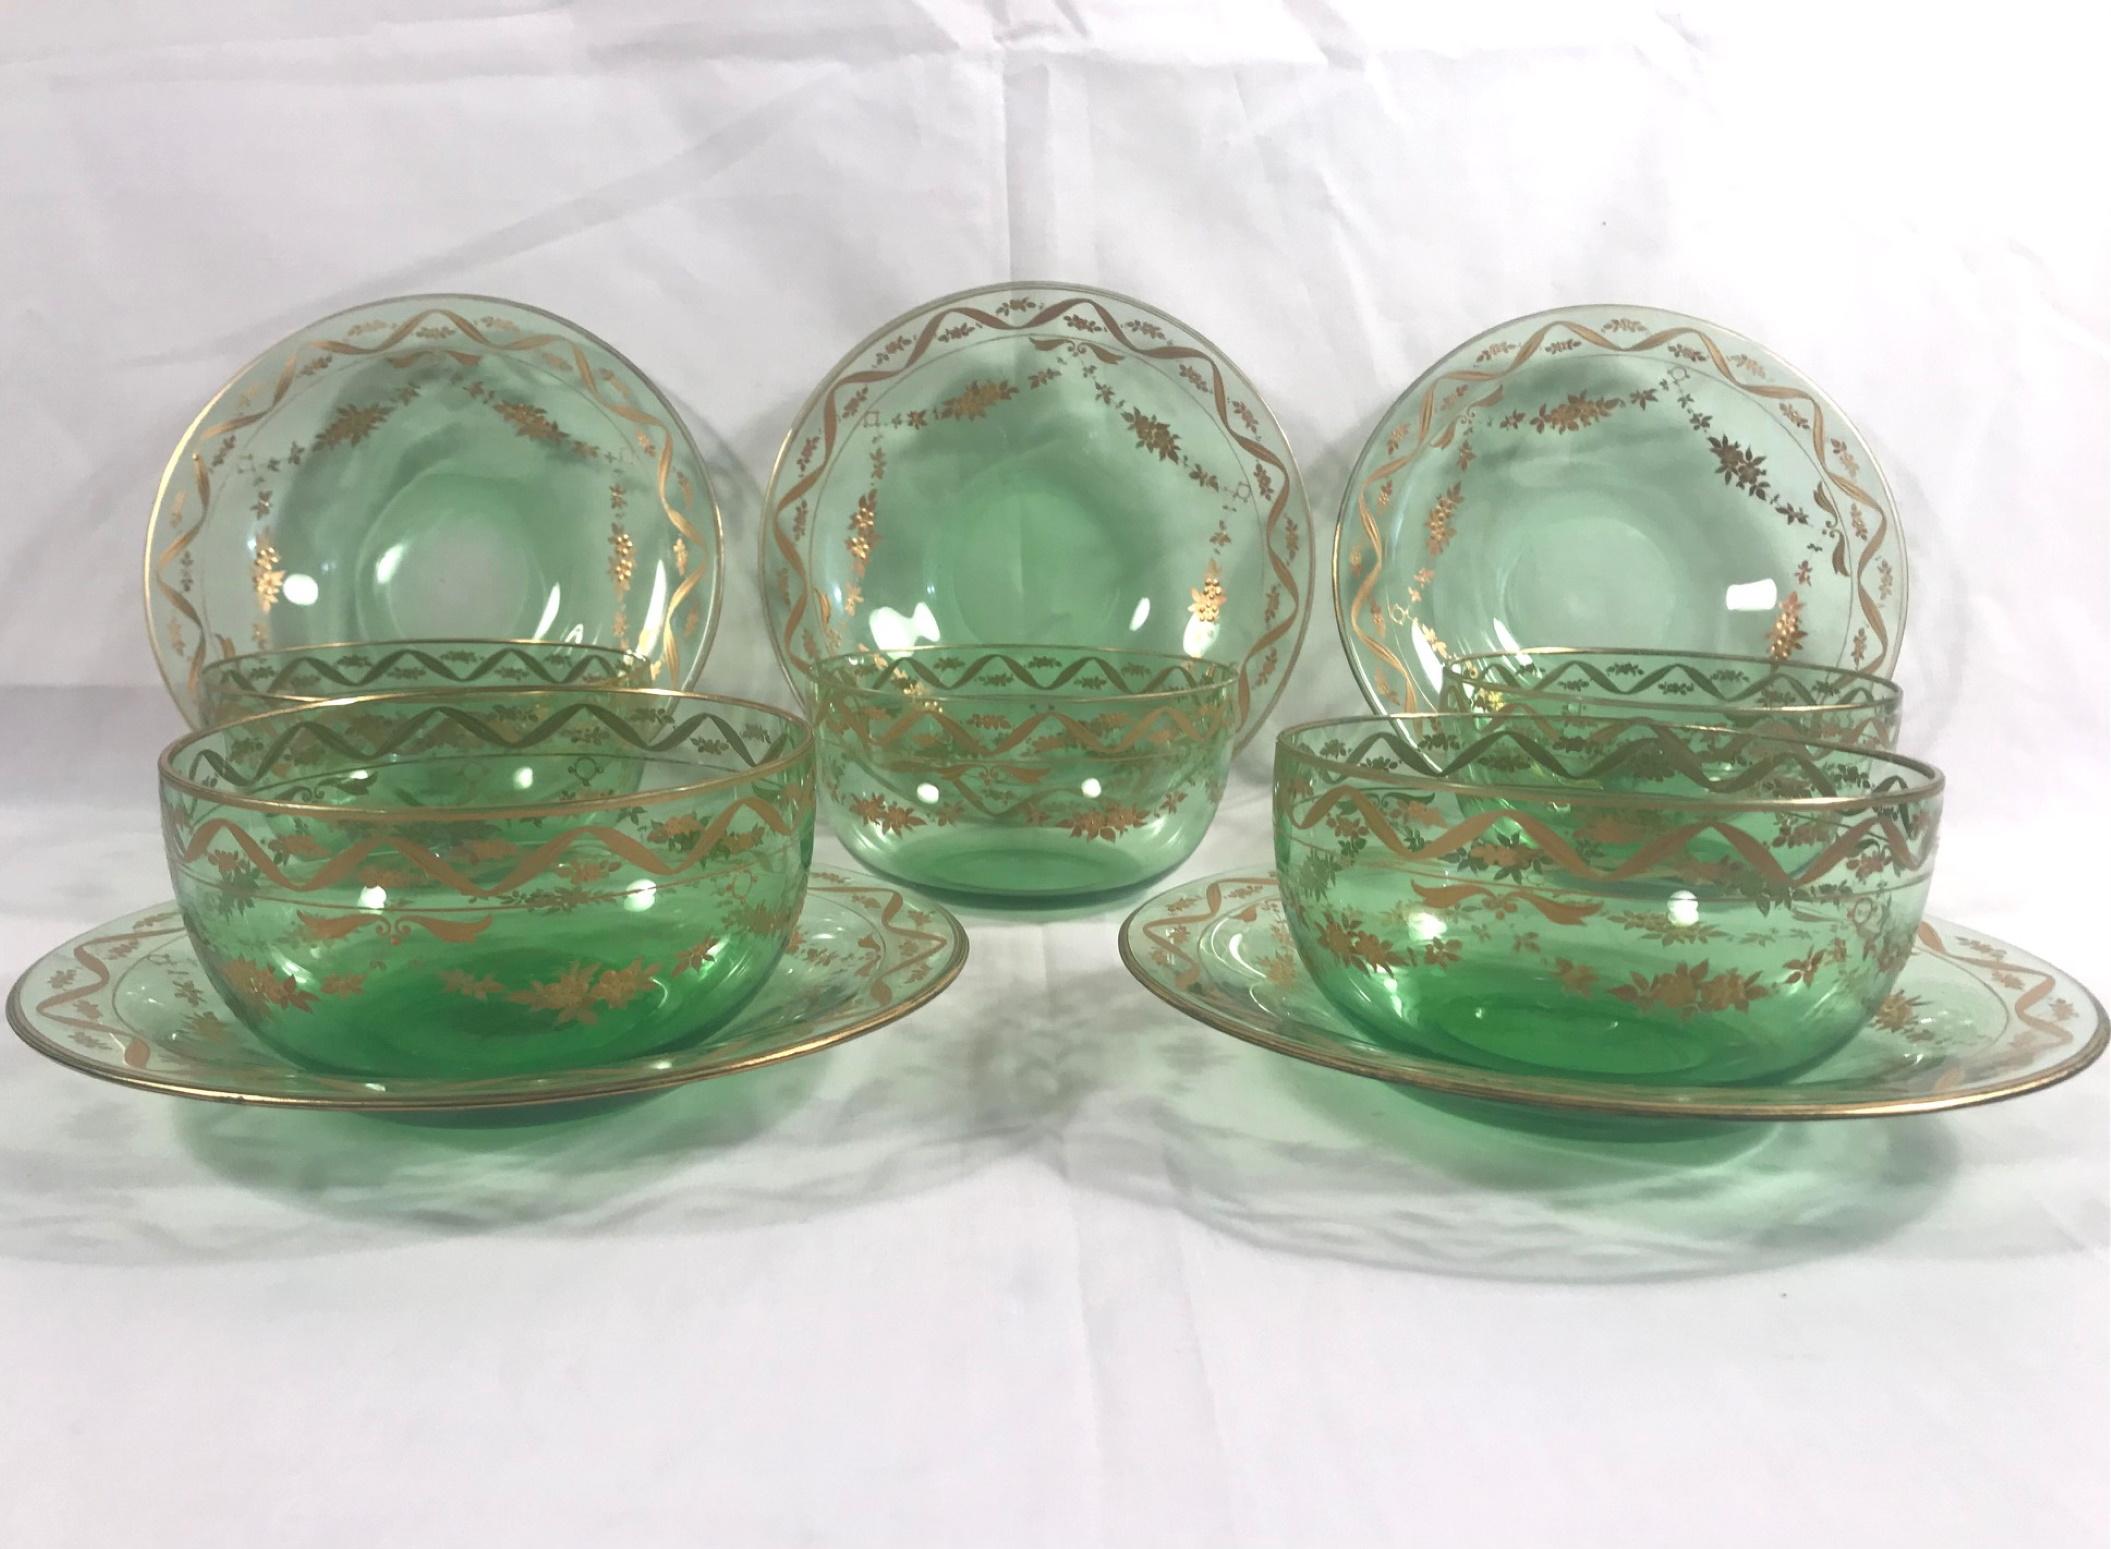 19th century Lobmeyr hand painted gold enameled emerald fruit bowls and under plates, set of 5

This late 19th century crystal is by J & L Lobmeyr of Vienna, Austria. All 5 bowls and 5 under plates are hand blown with polished pontils and